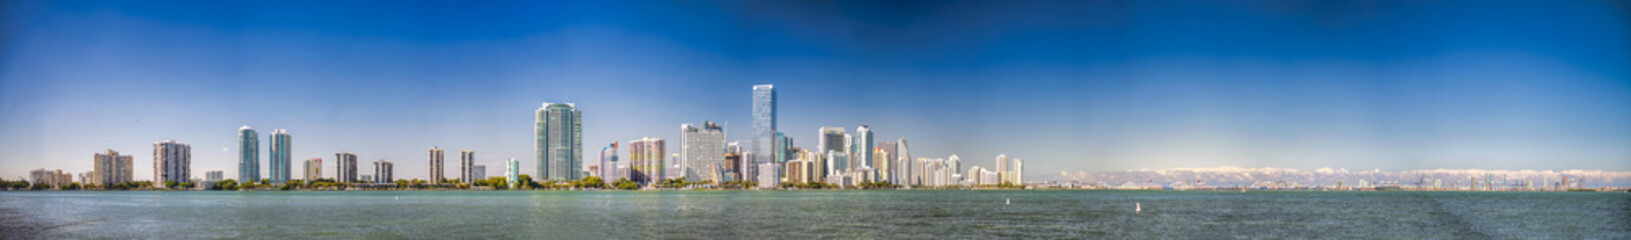 Panoramic view of Downtown Miami, Miami Beach Skyline and city port from Rickenbacker Causeway at sunset, with two airplanes in the sky